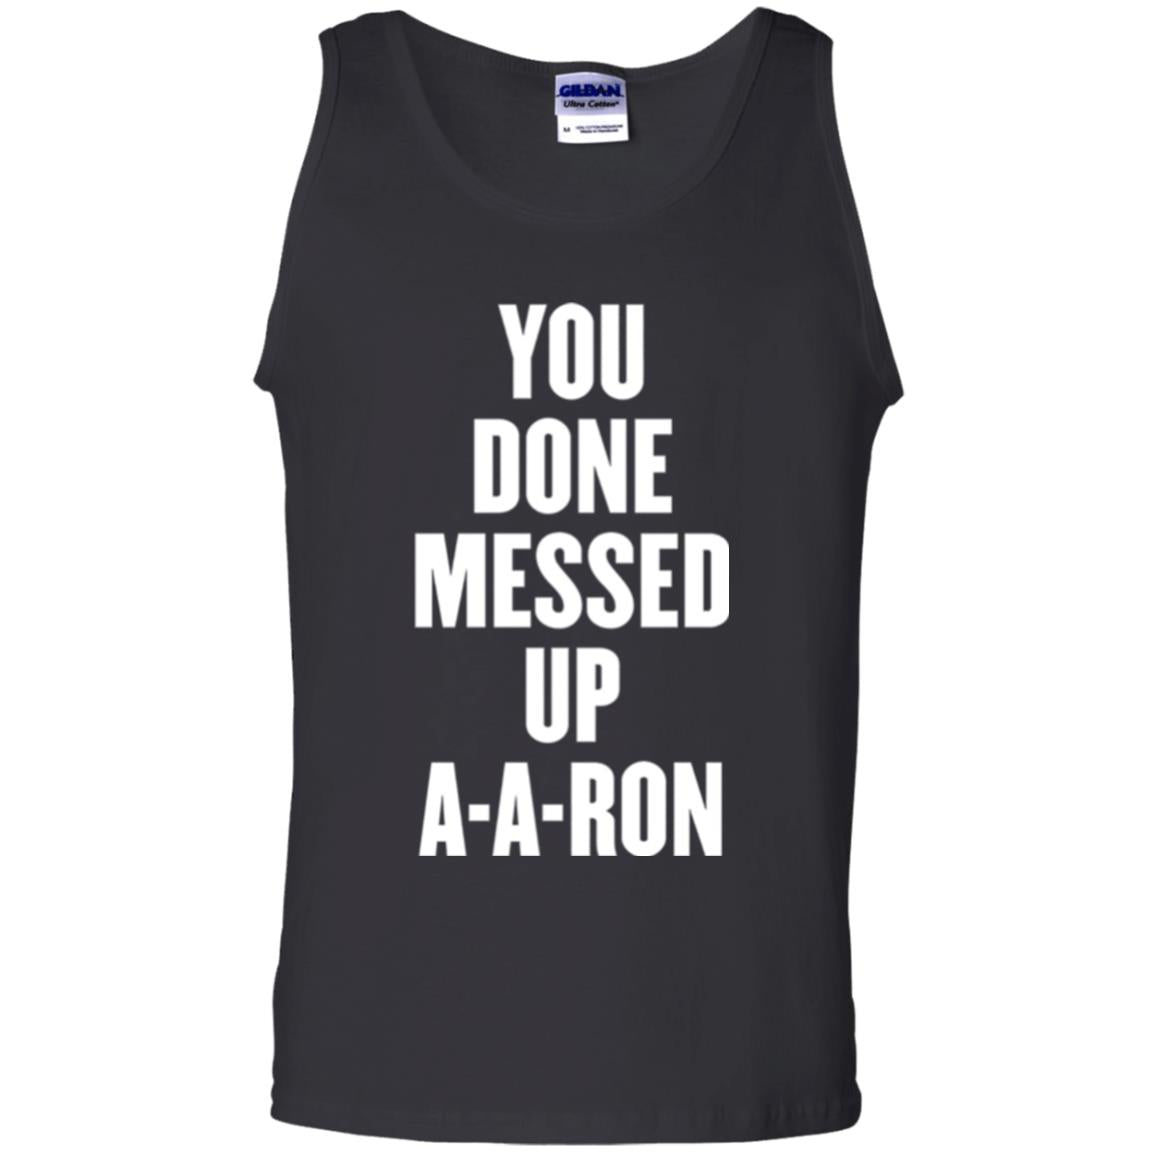 You Done Messed Up A-a-ron T-shirt